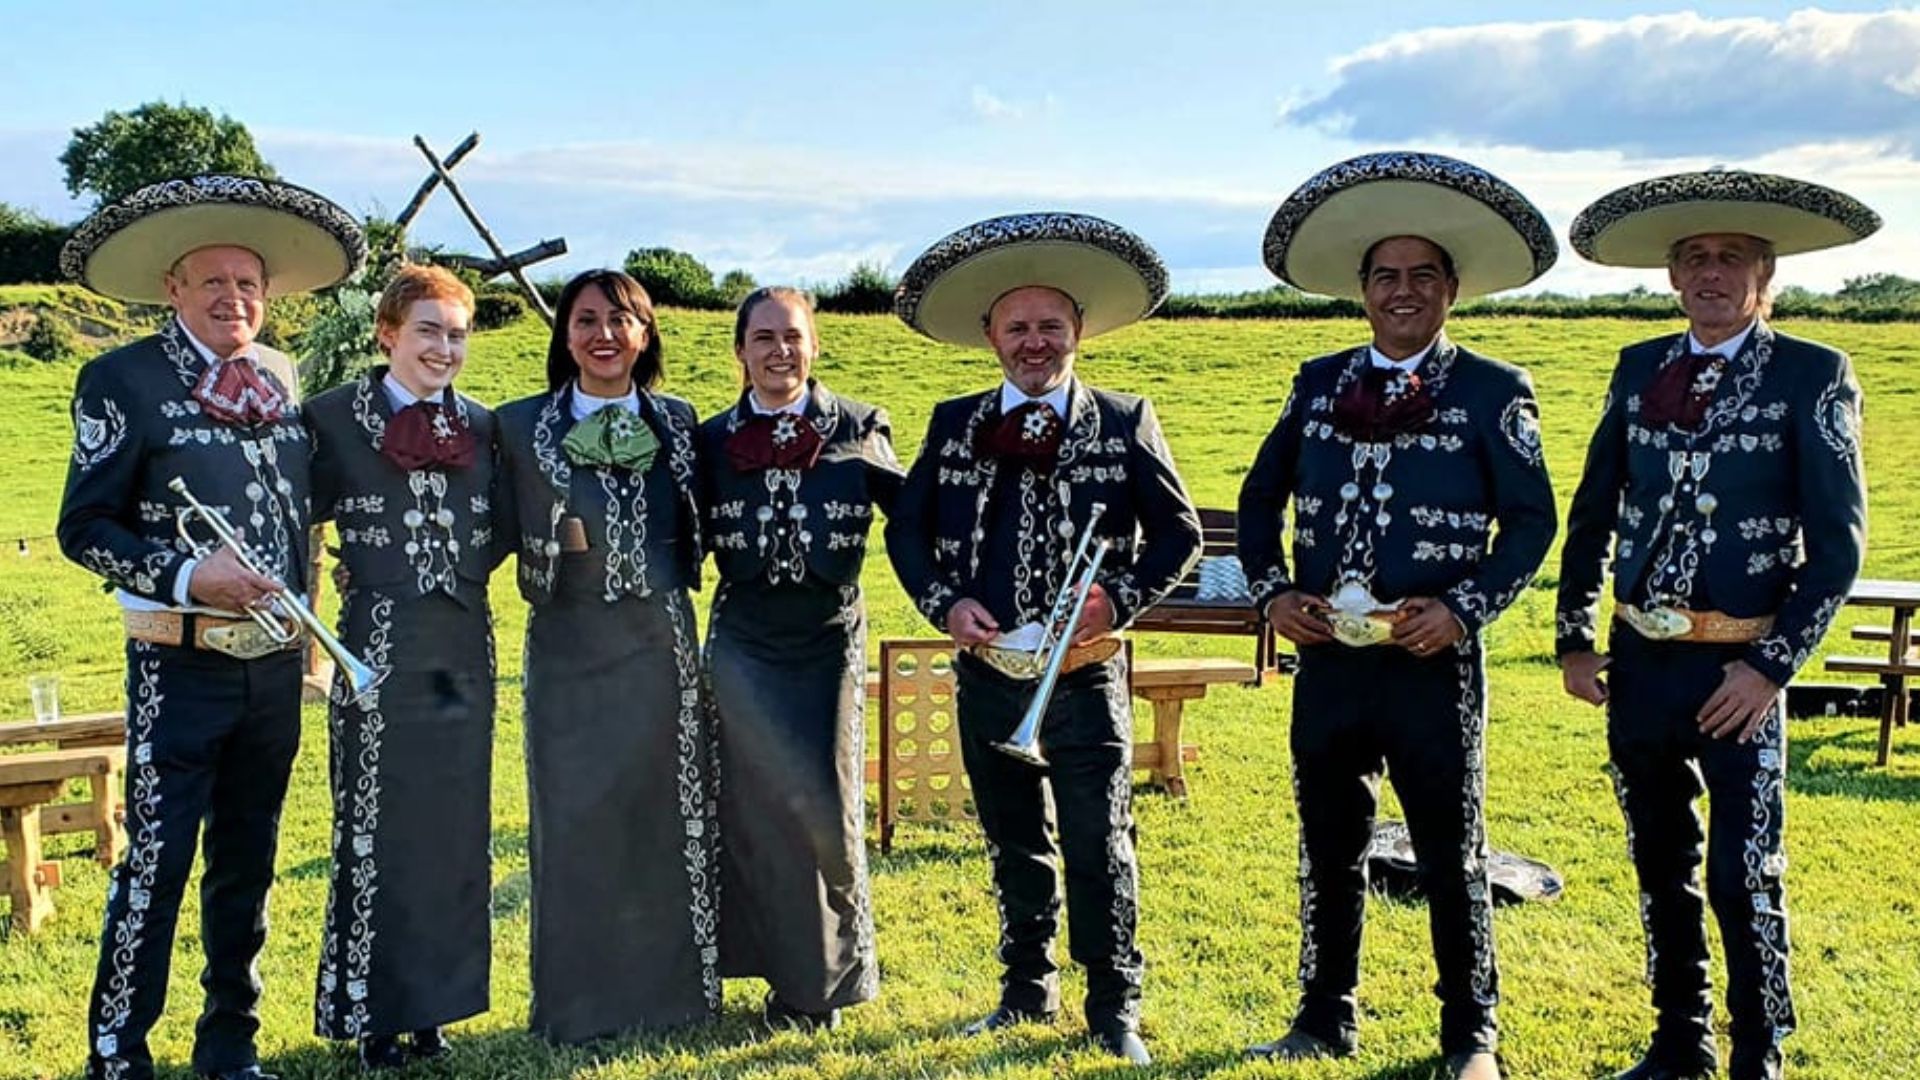 Irish Soldiers of Mexico - Pictured are the Mariachi San Patricio, the only Mexican/Irish mariachi band based in Dublin since 2011 who will be performing on the day